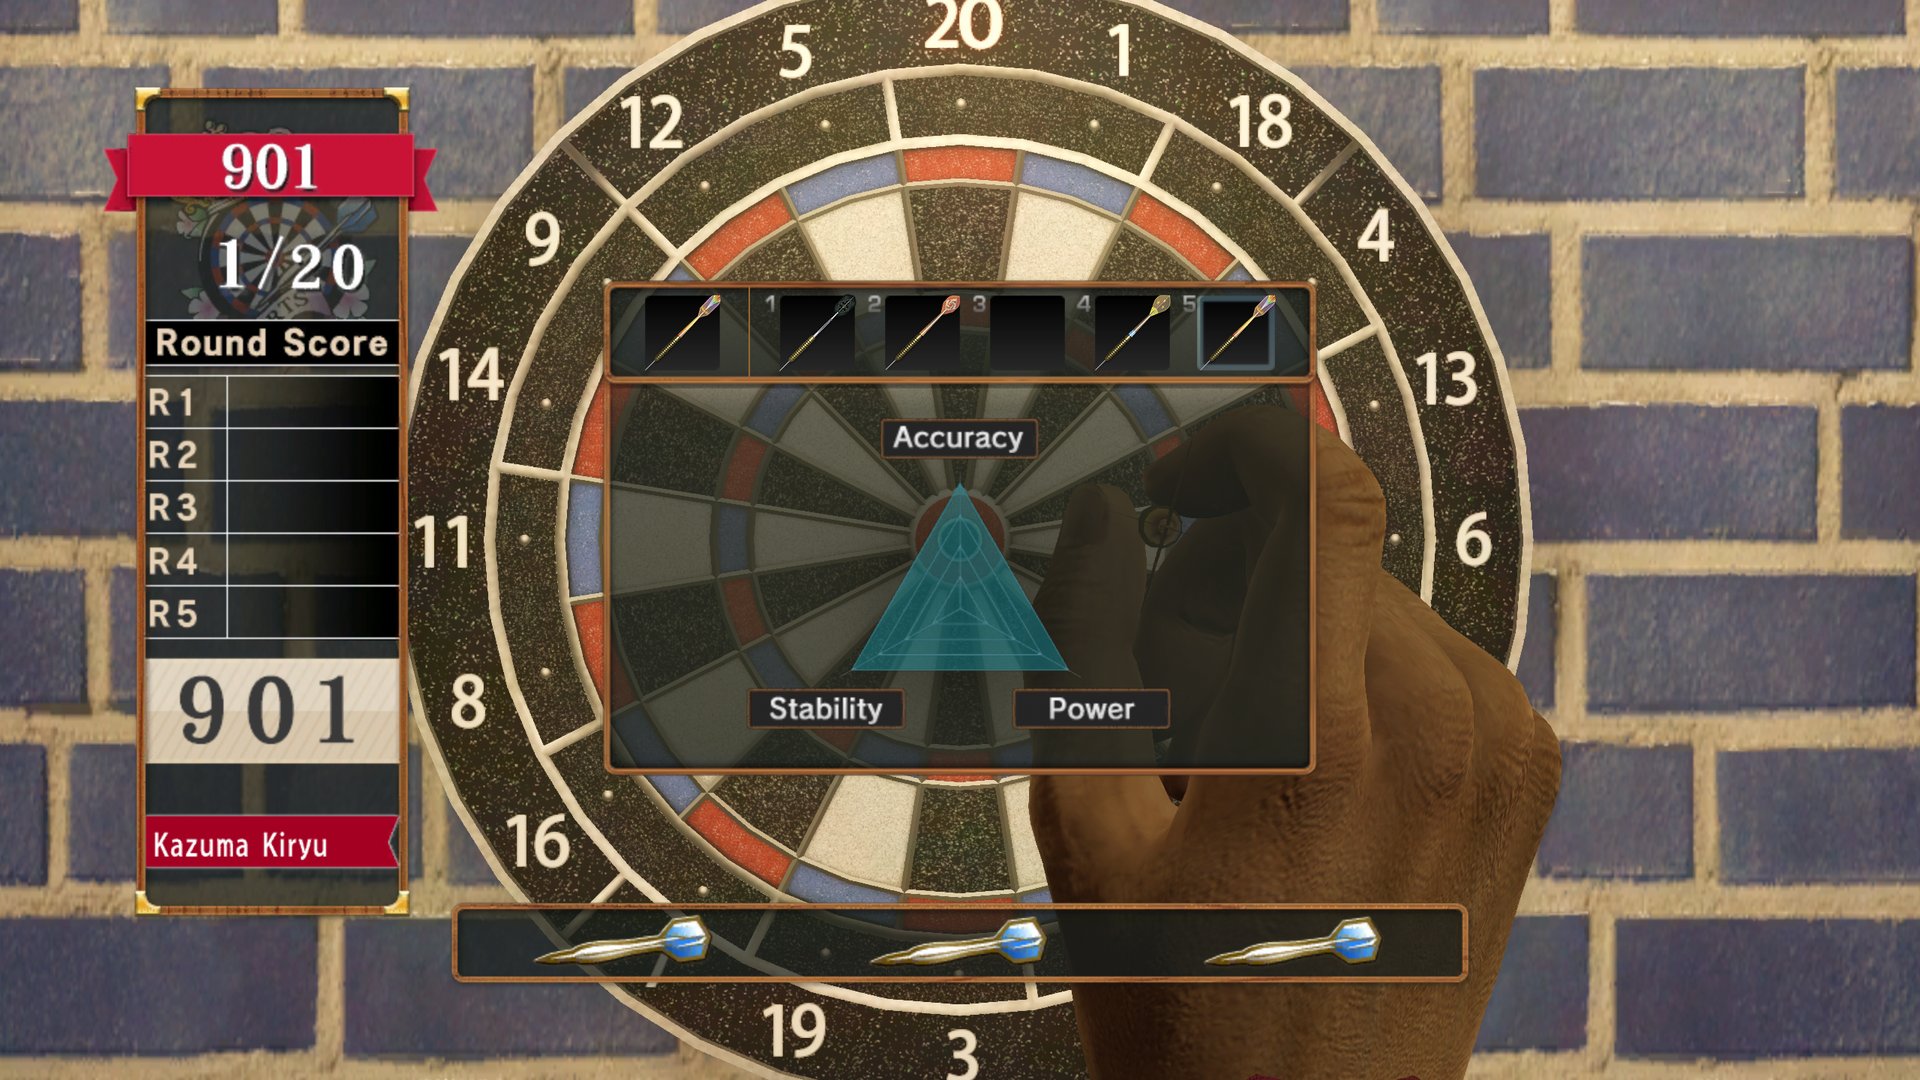 Can You Change Darts During Game